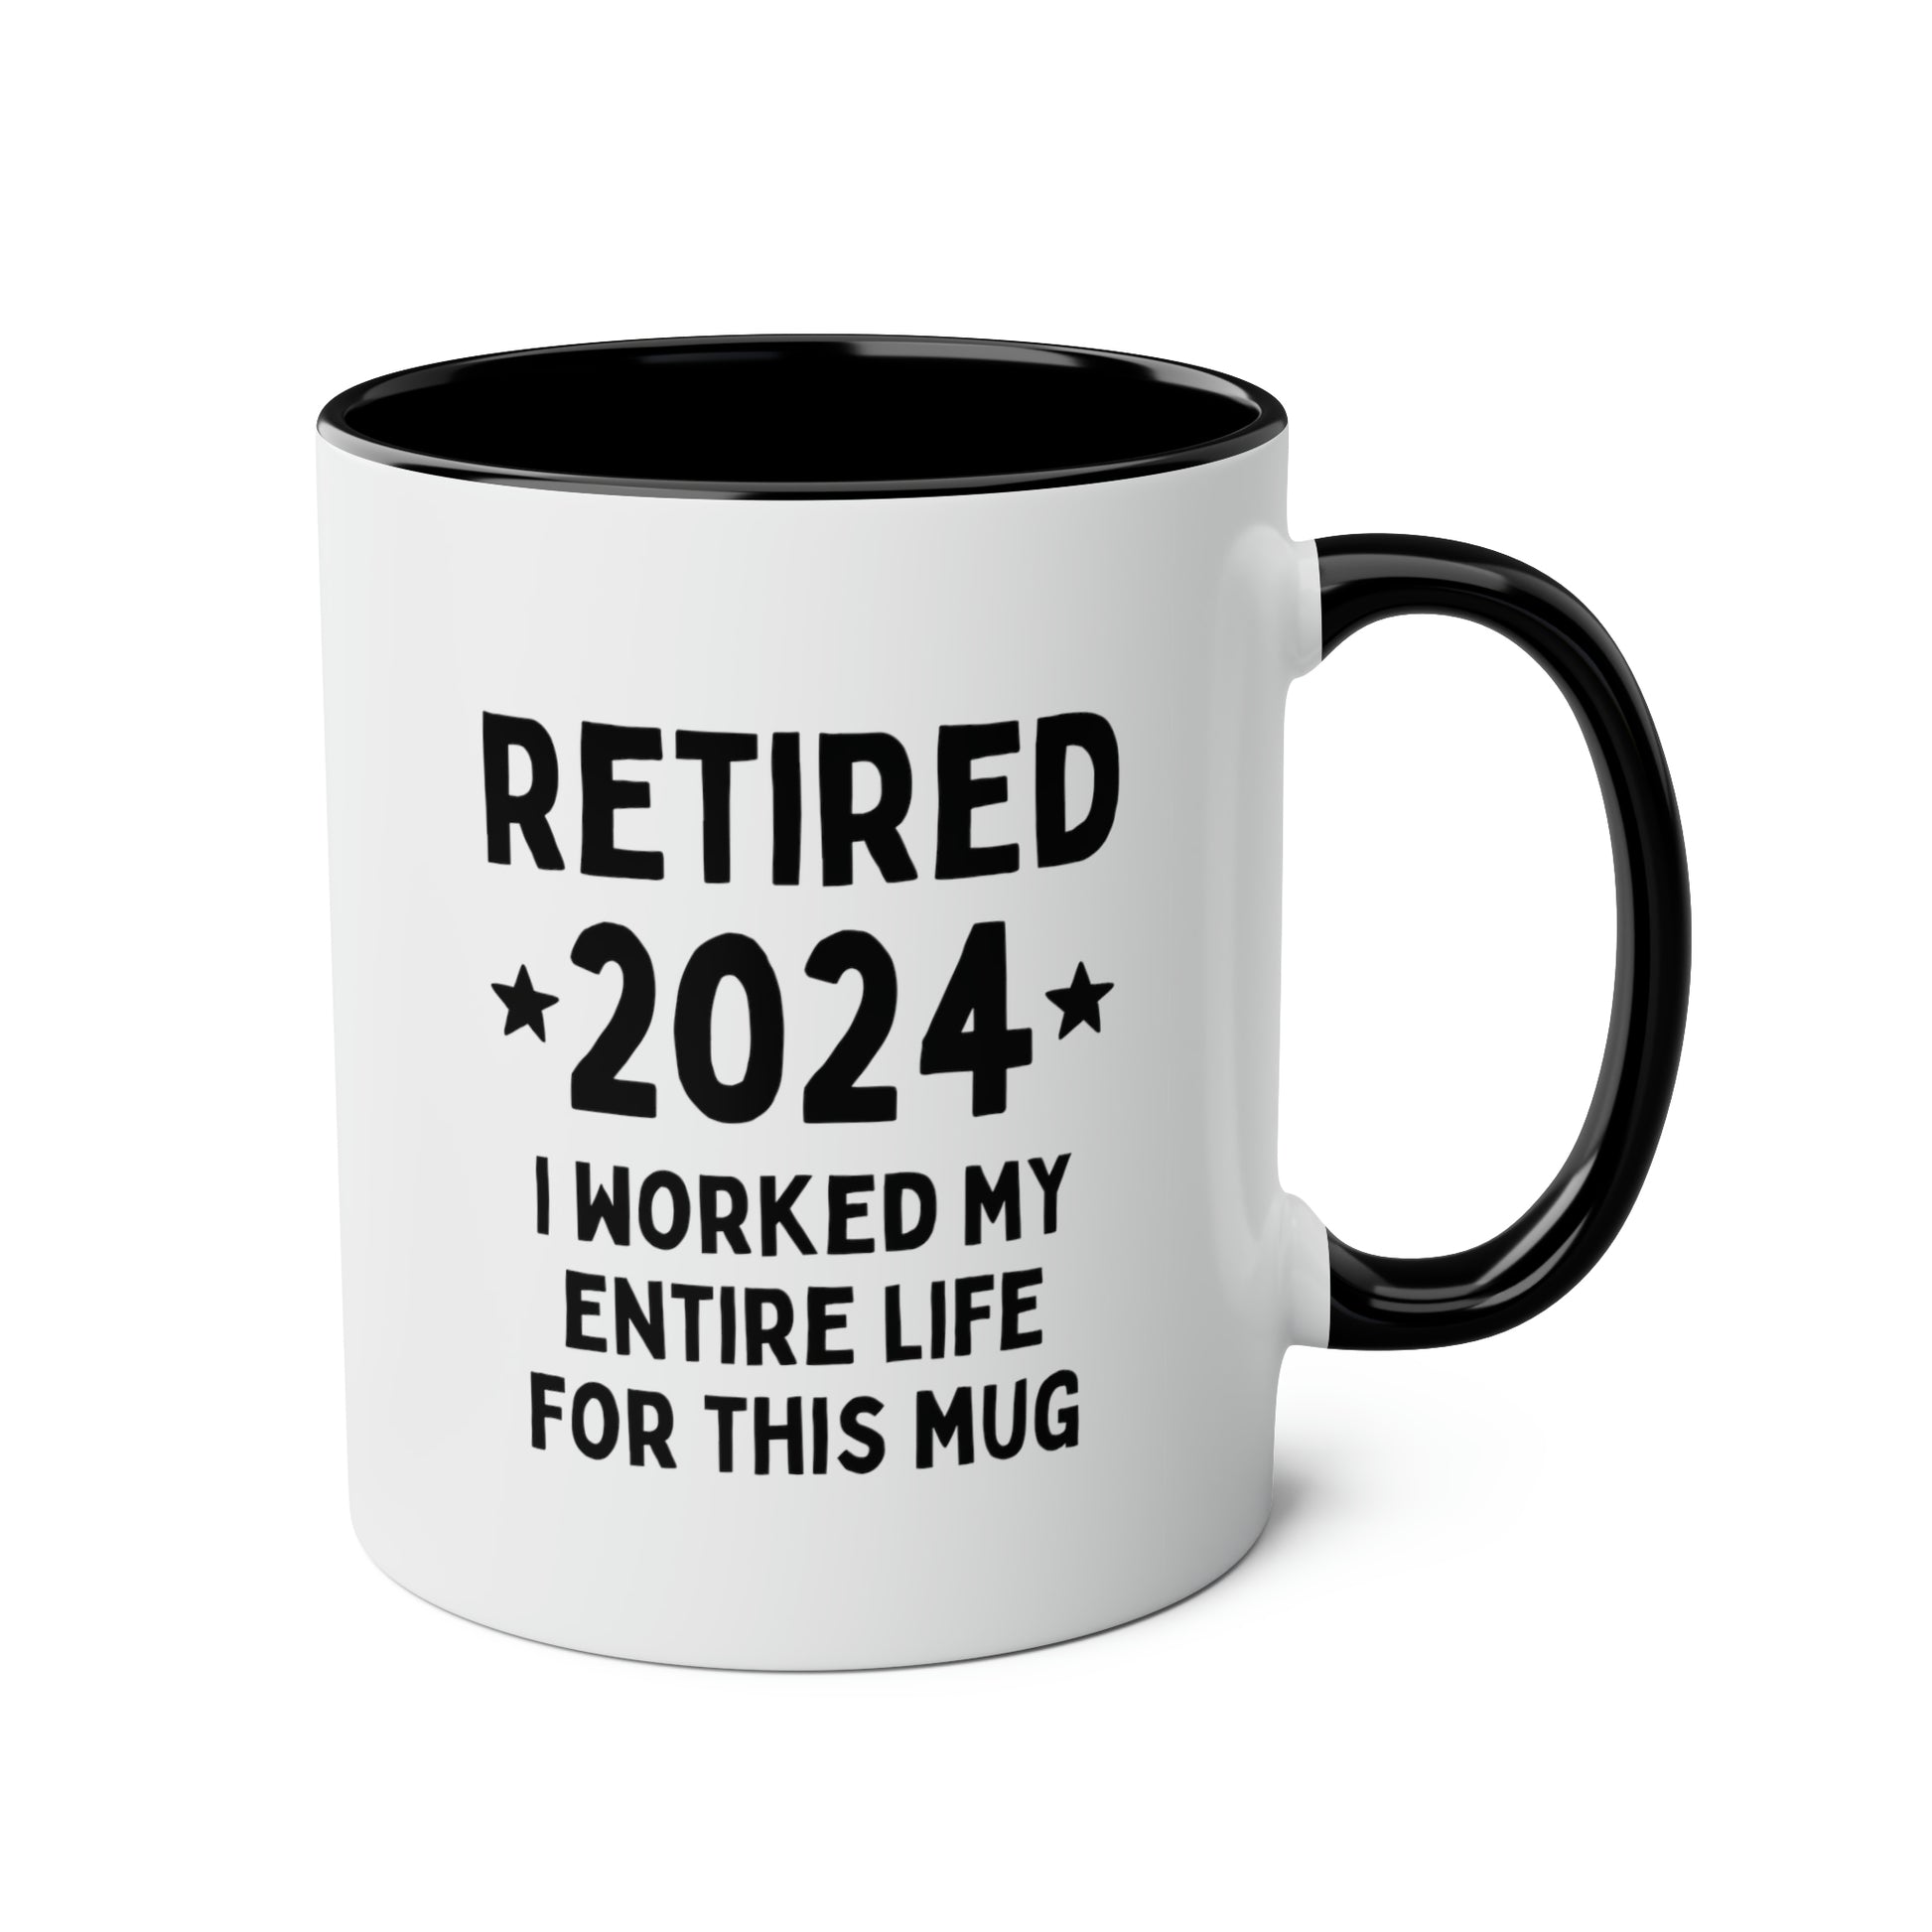 Retired 2024 I Worked My Entire Life For This Mug 11oz white with black accent funny large coffee mug gift for retirement man woman waveywares wavey wares wavywares wavy wares